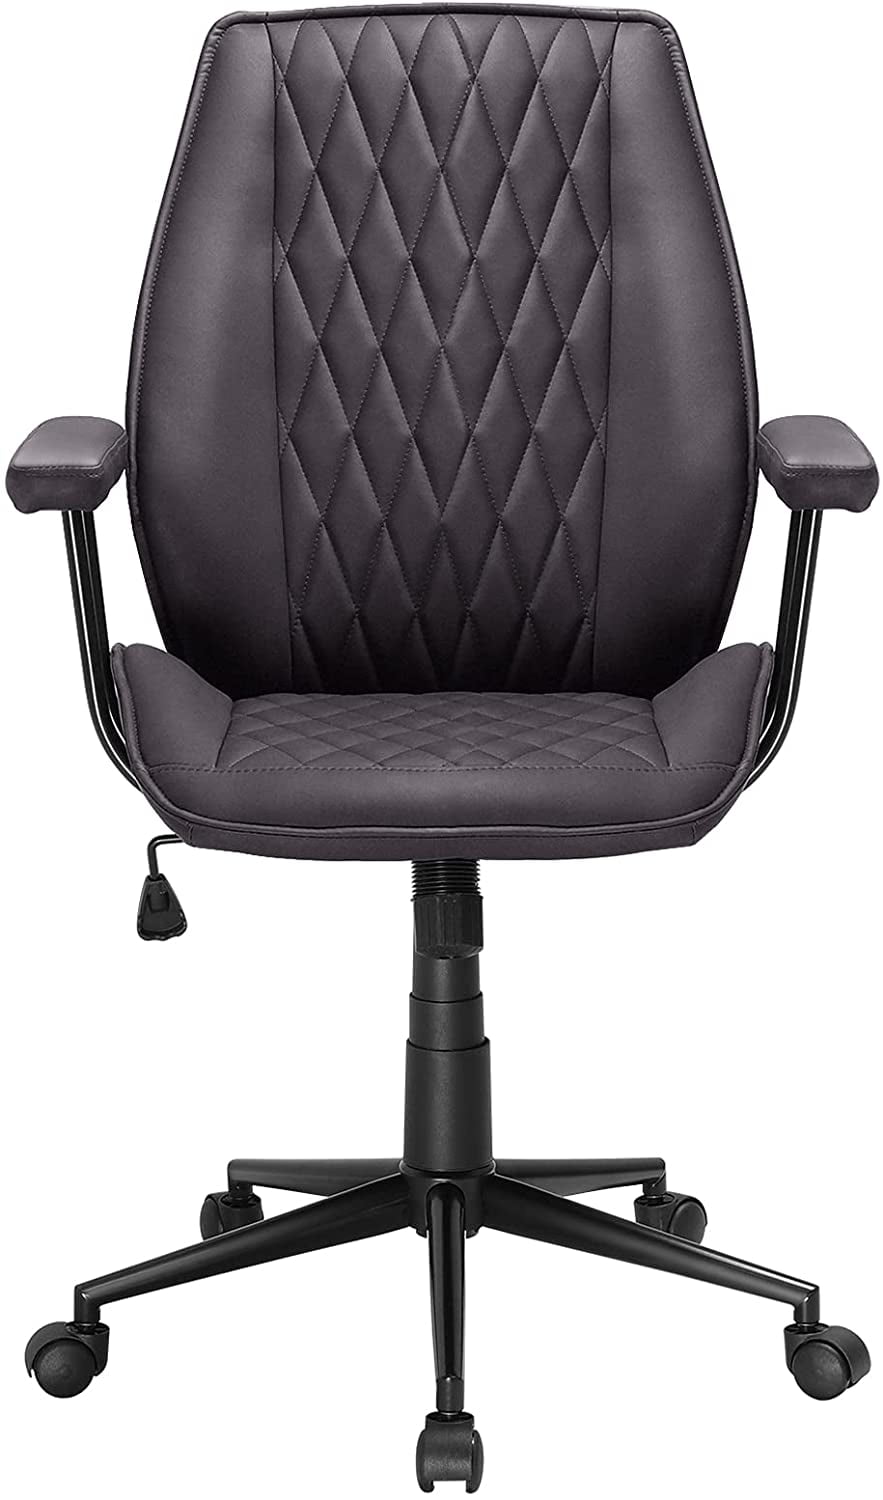 PU Leather High Back Office Chair Executive Task Ergonomic Computer Desk Jujube for sale online